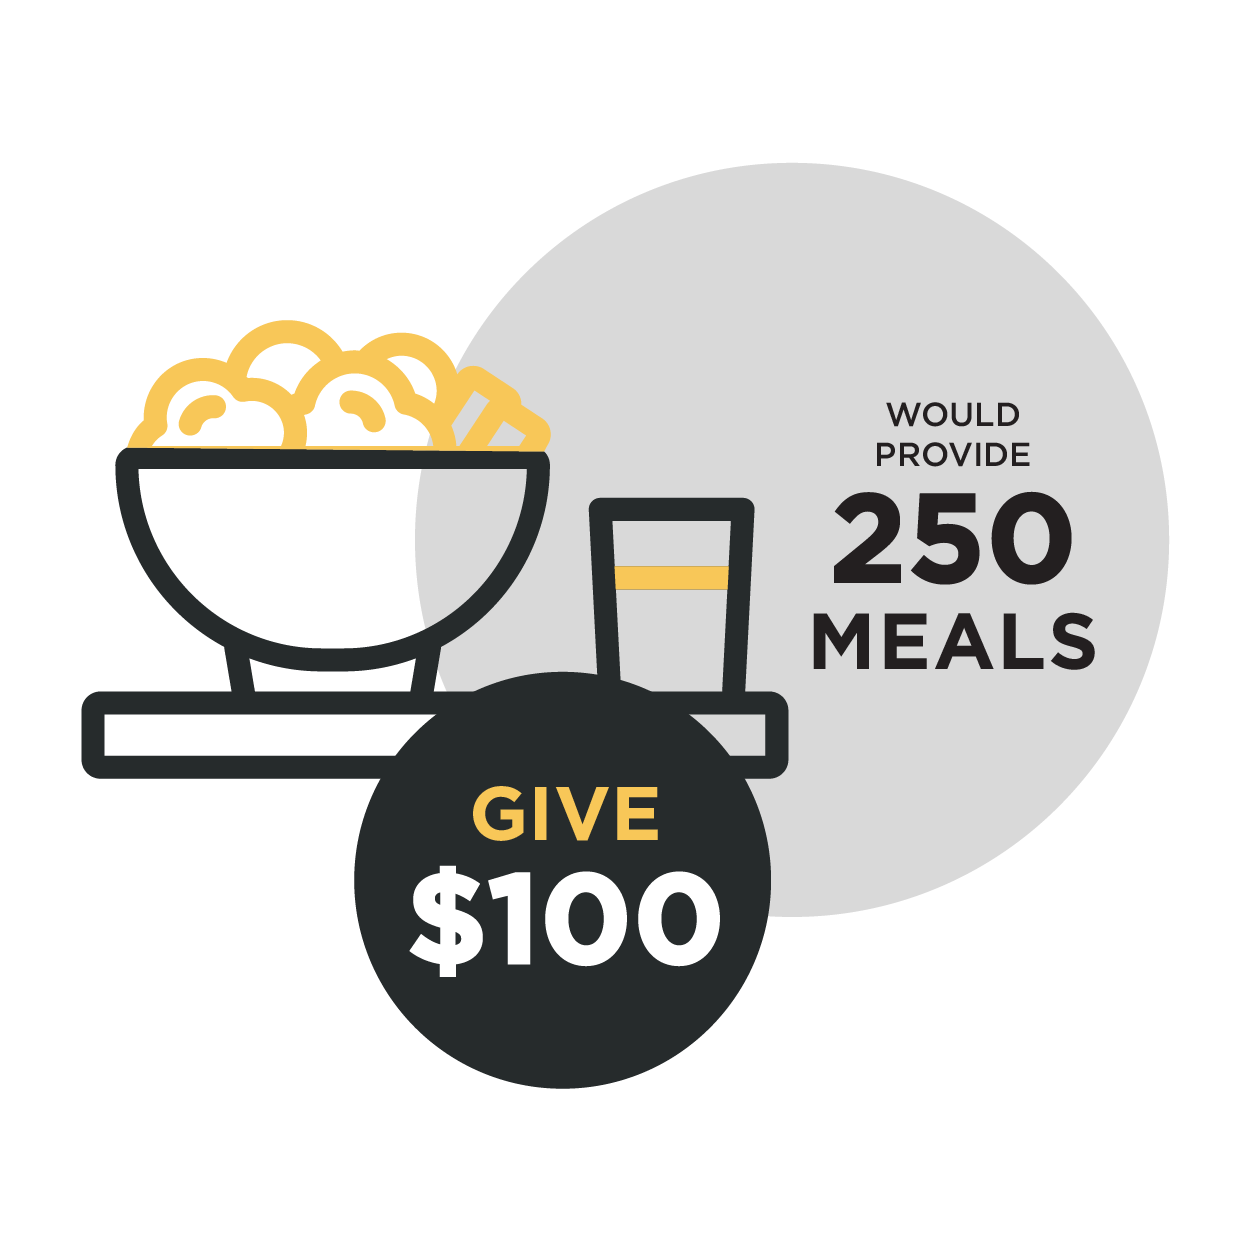 Give $100 will provide 250 meals